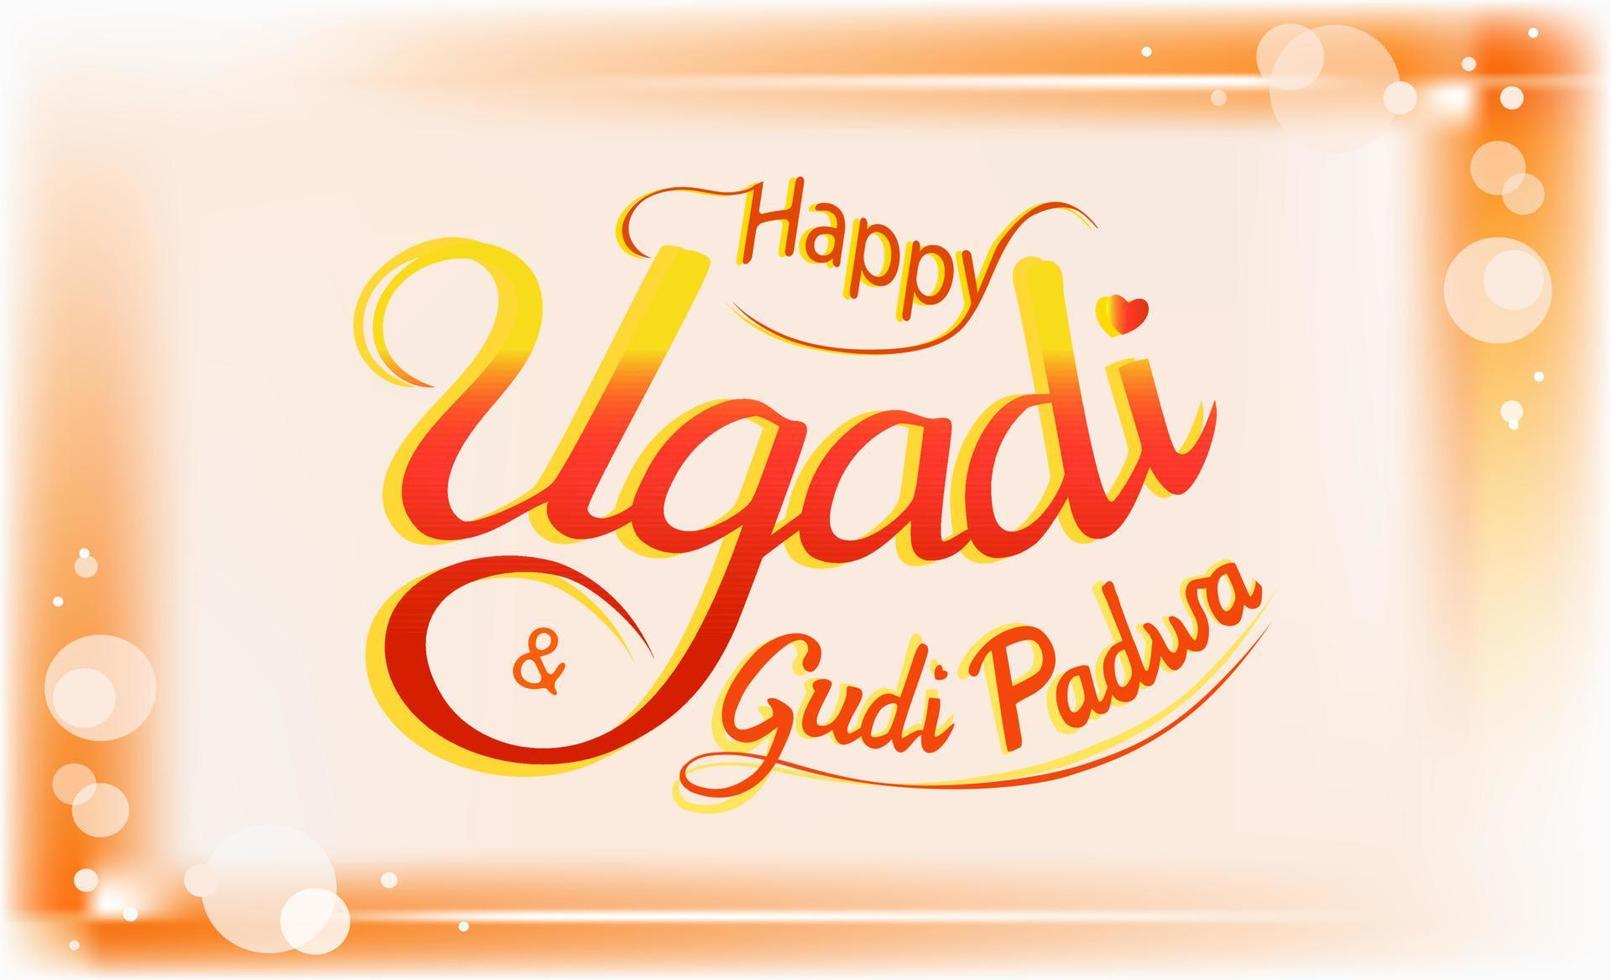 Happy Ugadi, Gudi Padwa, Hindu New Year festival greeting on Chaitra month. Elegant bright red and yellow lettering with shades, flourishes, orange frame with shiny stars, for print, card, poster, web vector